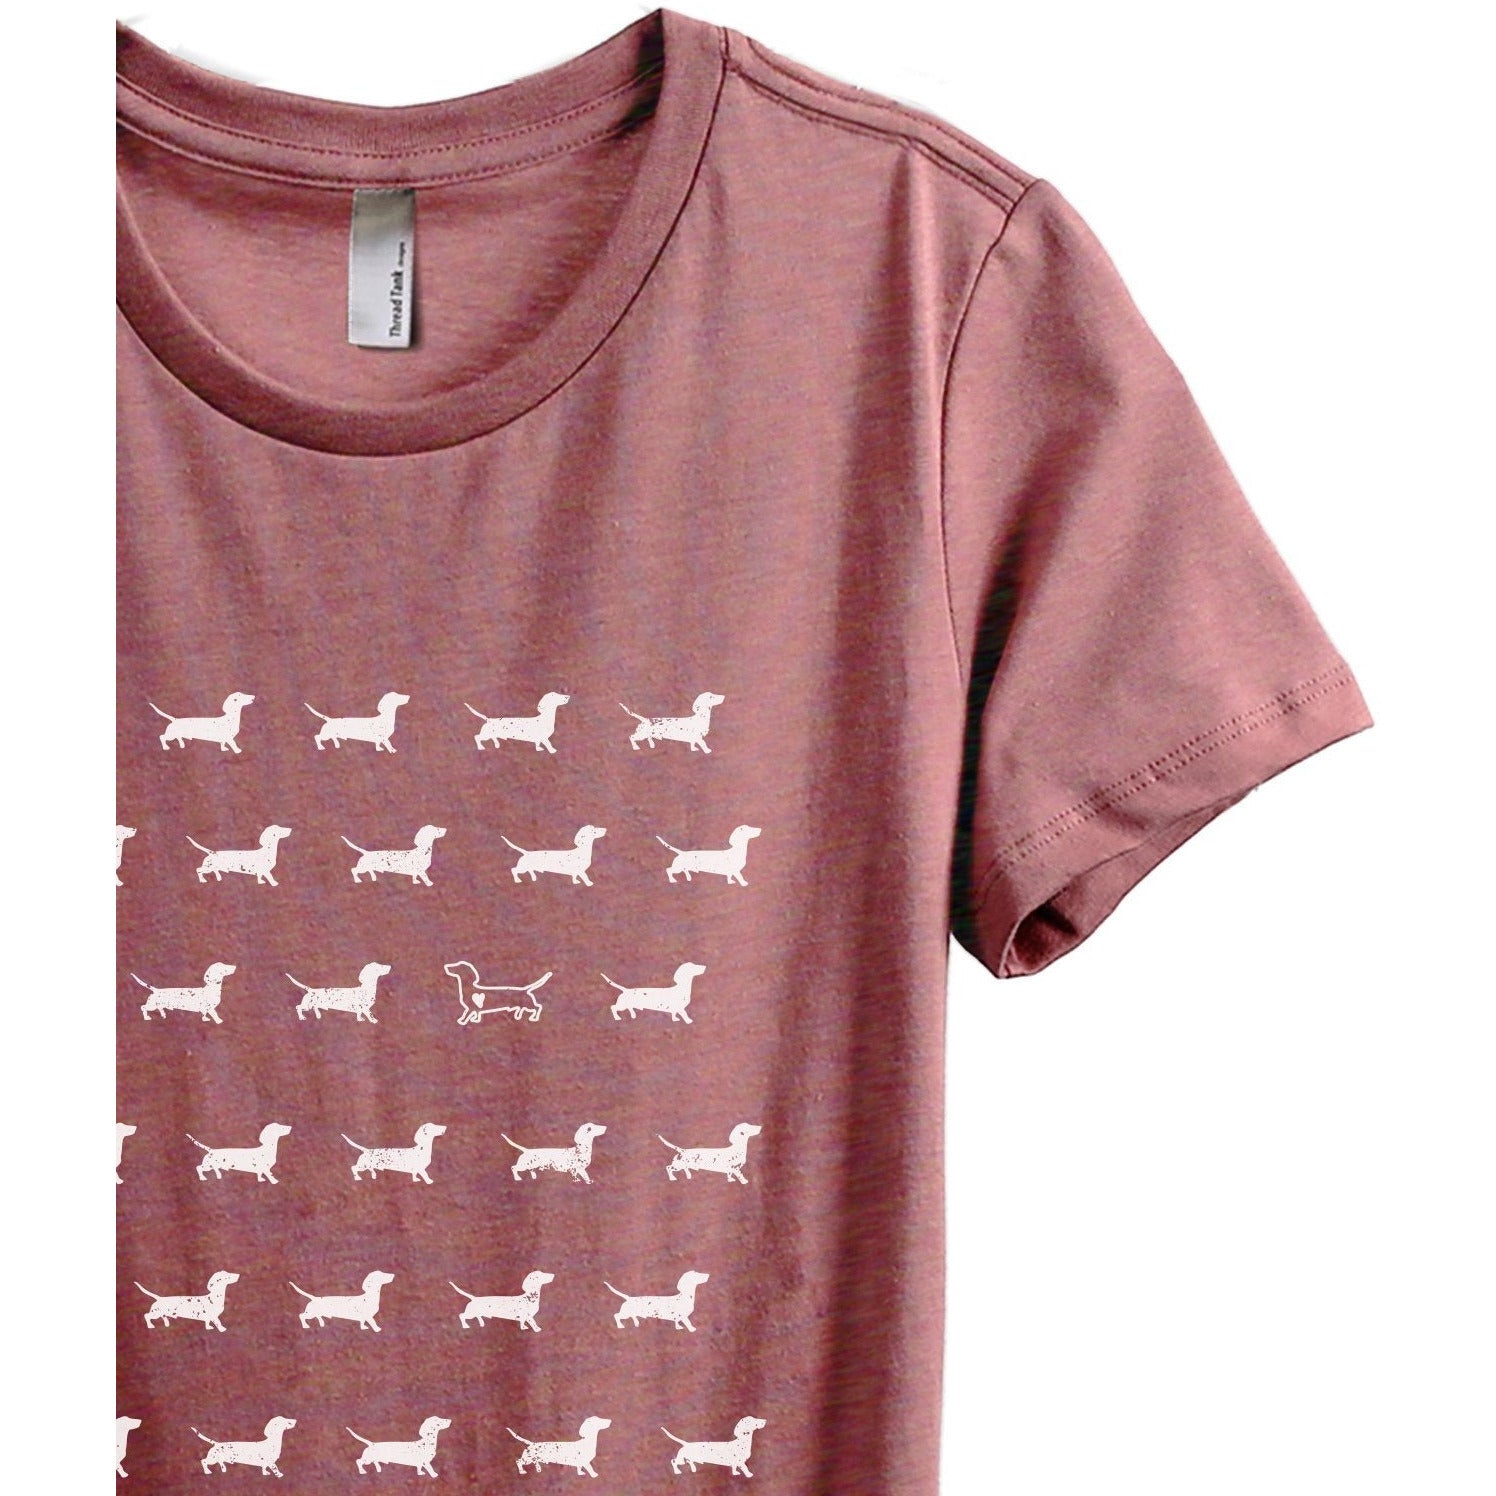 Dachshund Stand Out Women's Relaxed Crewneck T-Shirt Top Tee Heather Rouge Zoom Details
